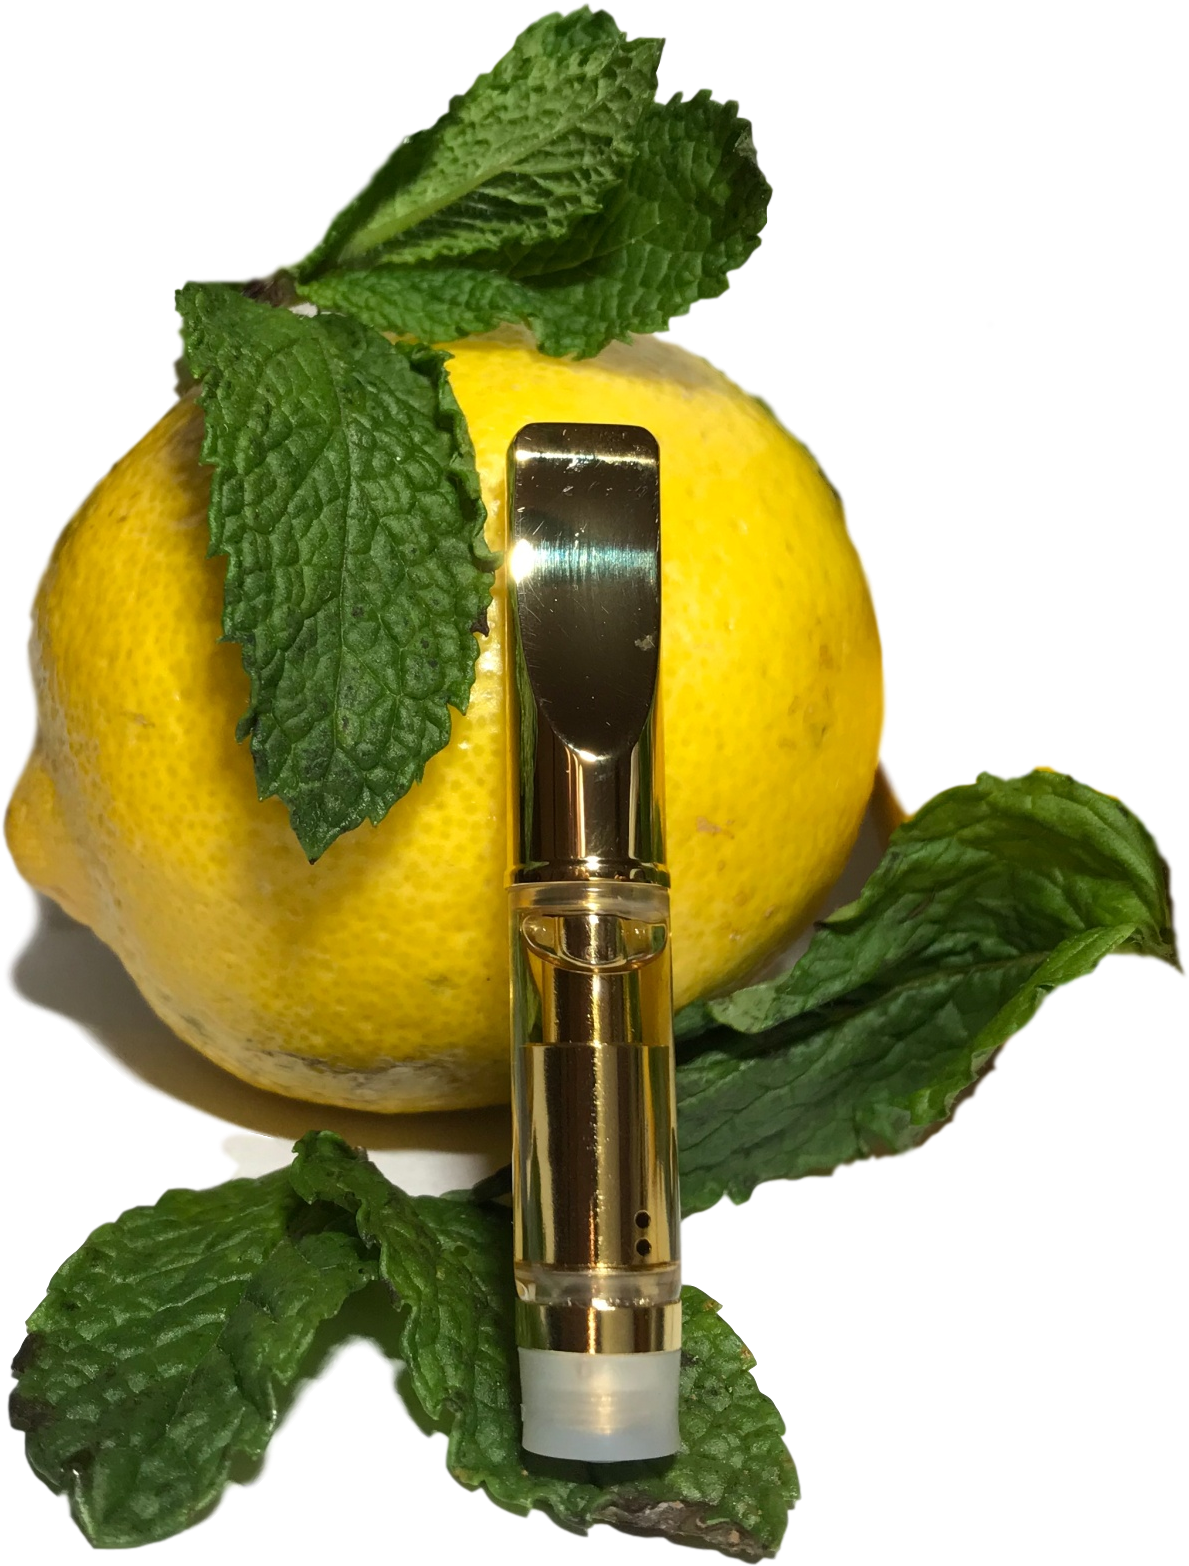 A Lemon With A Metal Object On It